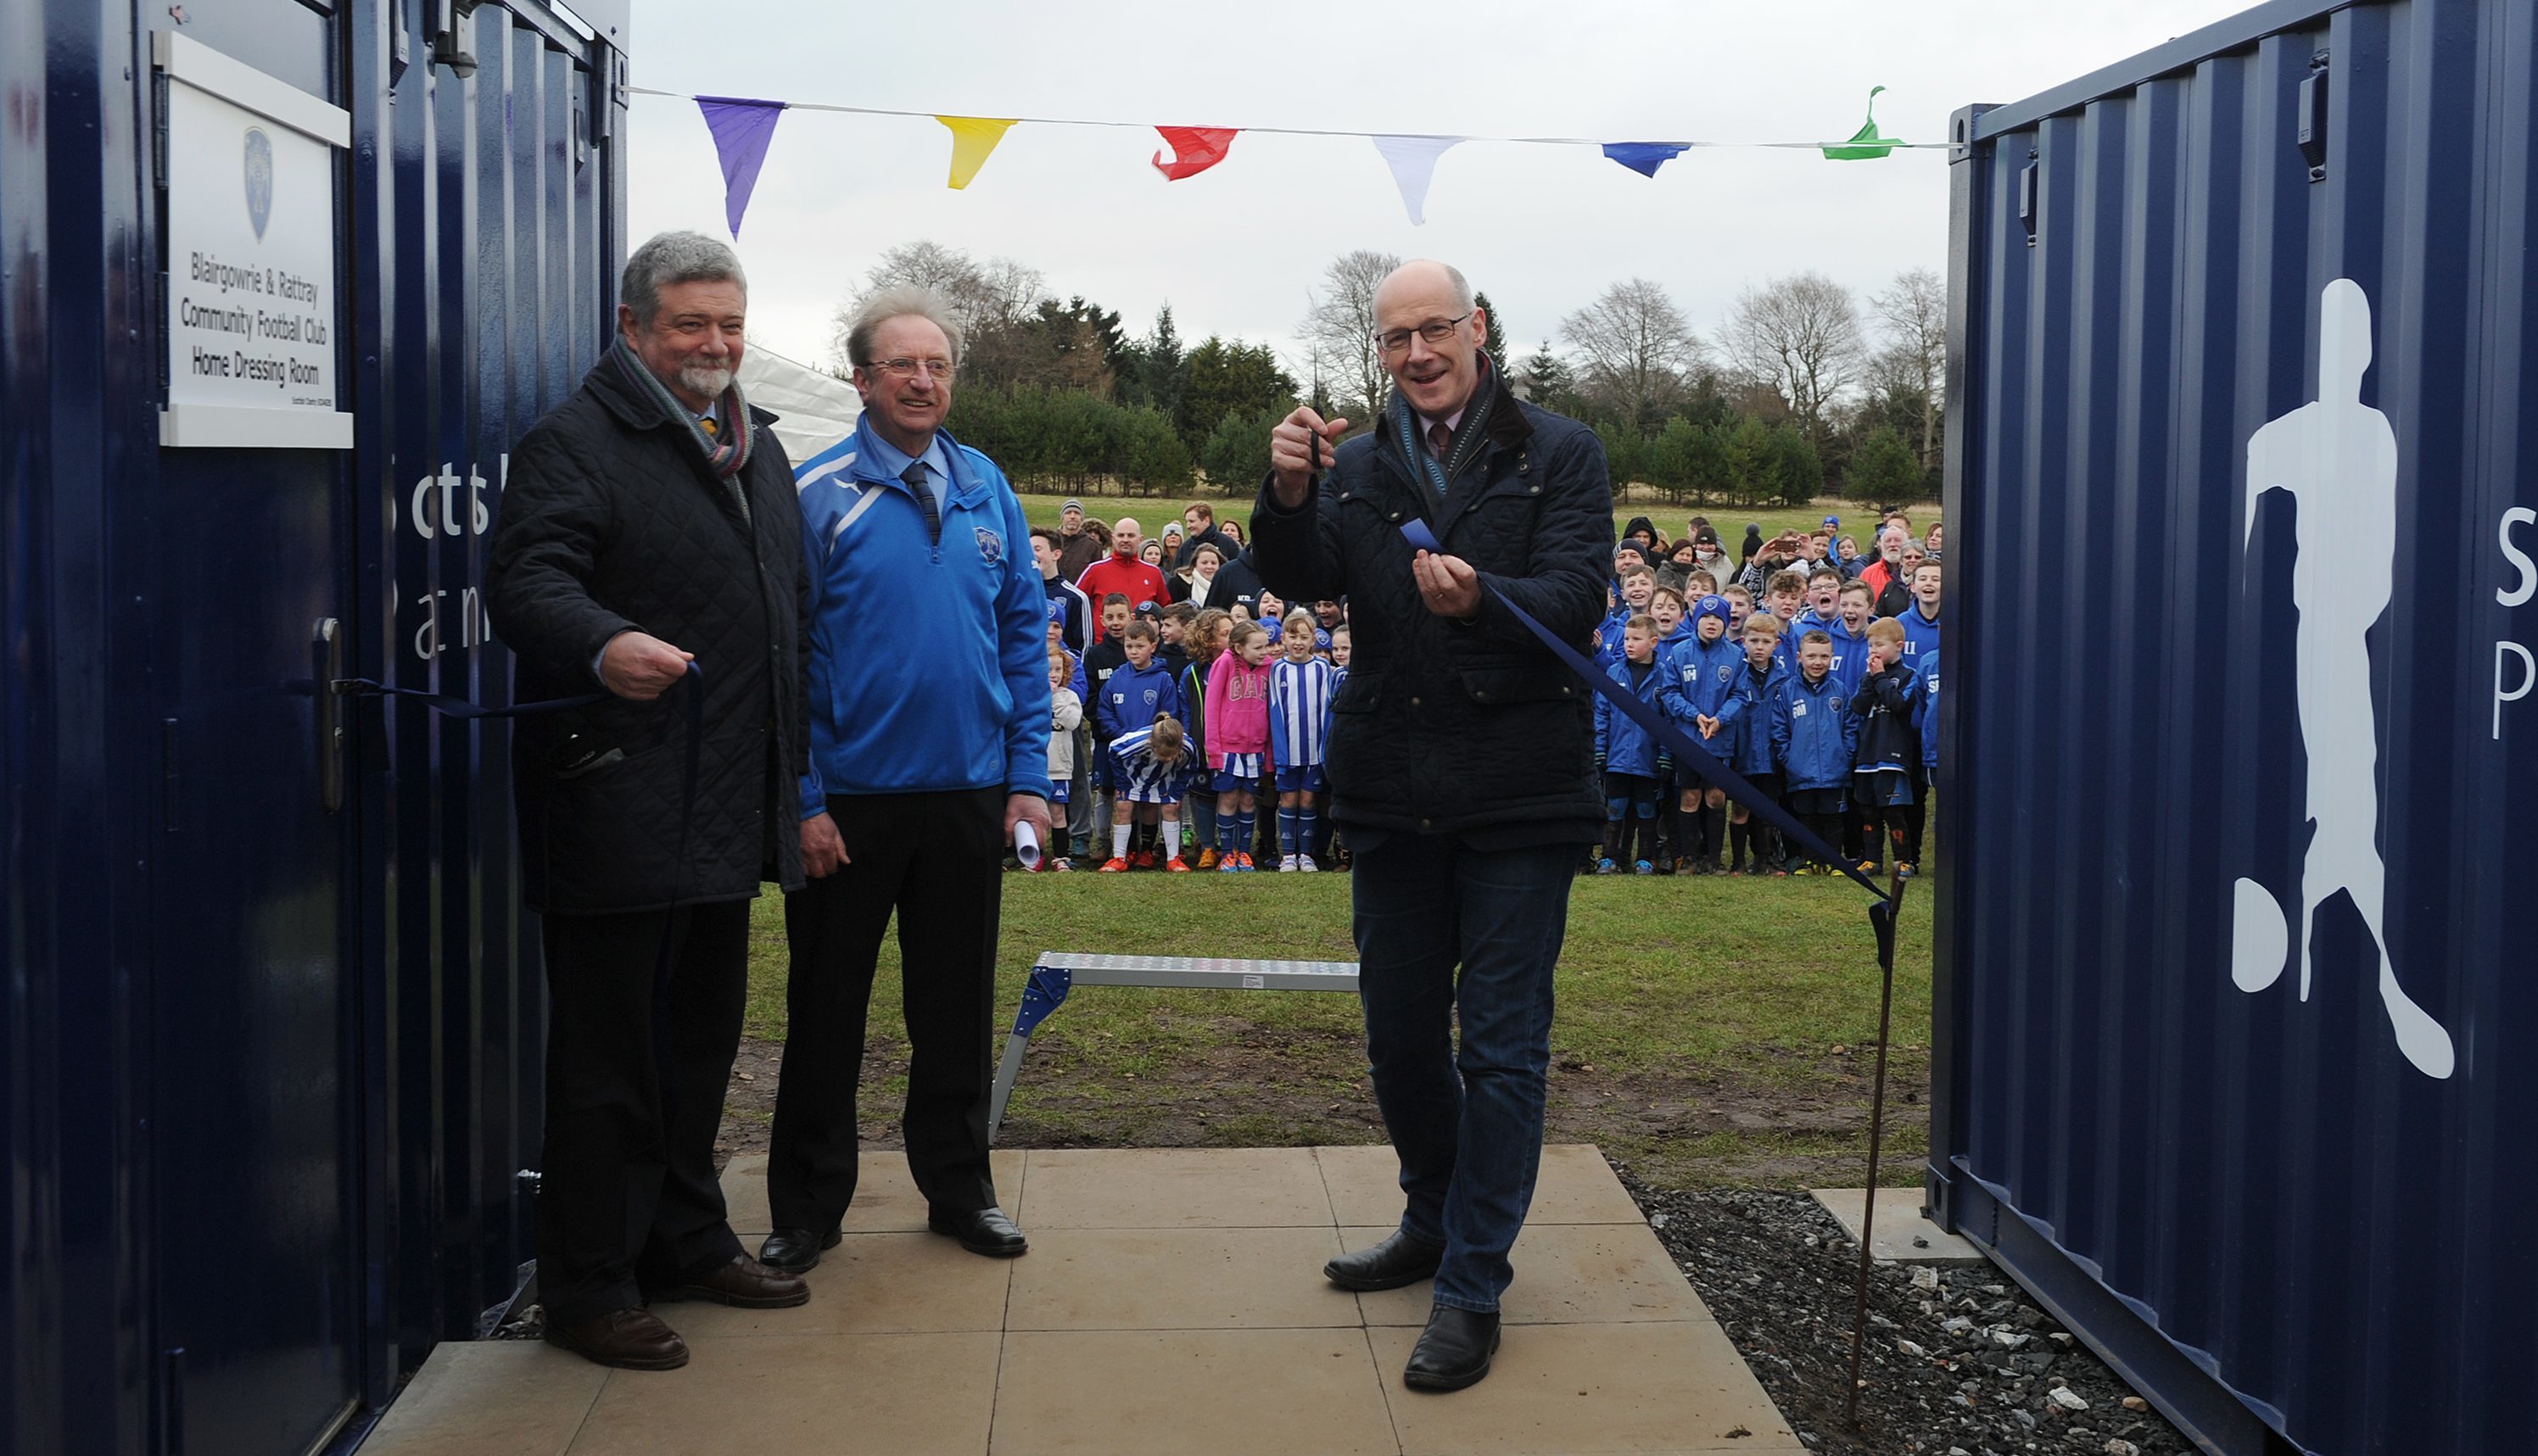 John Swinney launched the new solar powered Blairgowrie and Rattray Community Football Club facilities in February with James Clydesdale (Chair of the Scottish Football Partnership) and  Sandy Thomson (Chair Blairgowrie and Rattray Community FC)